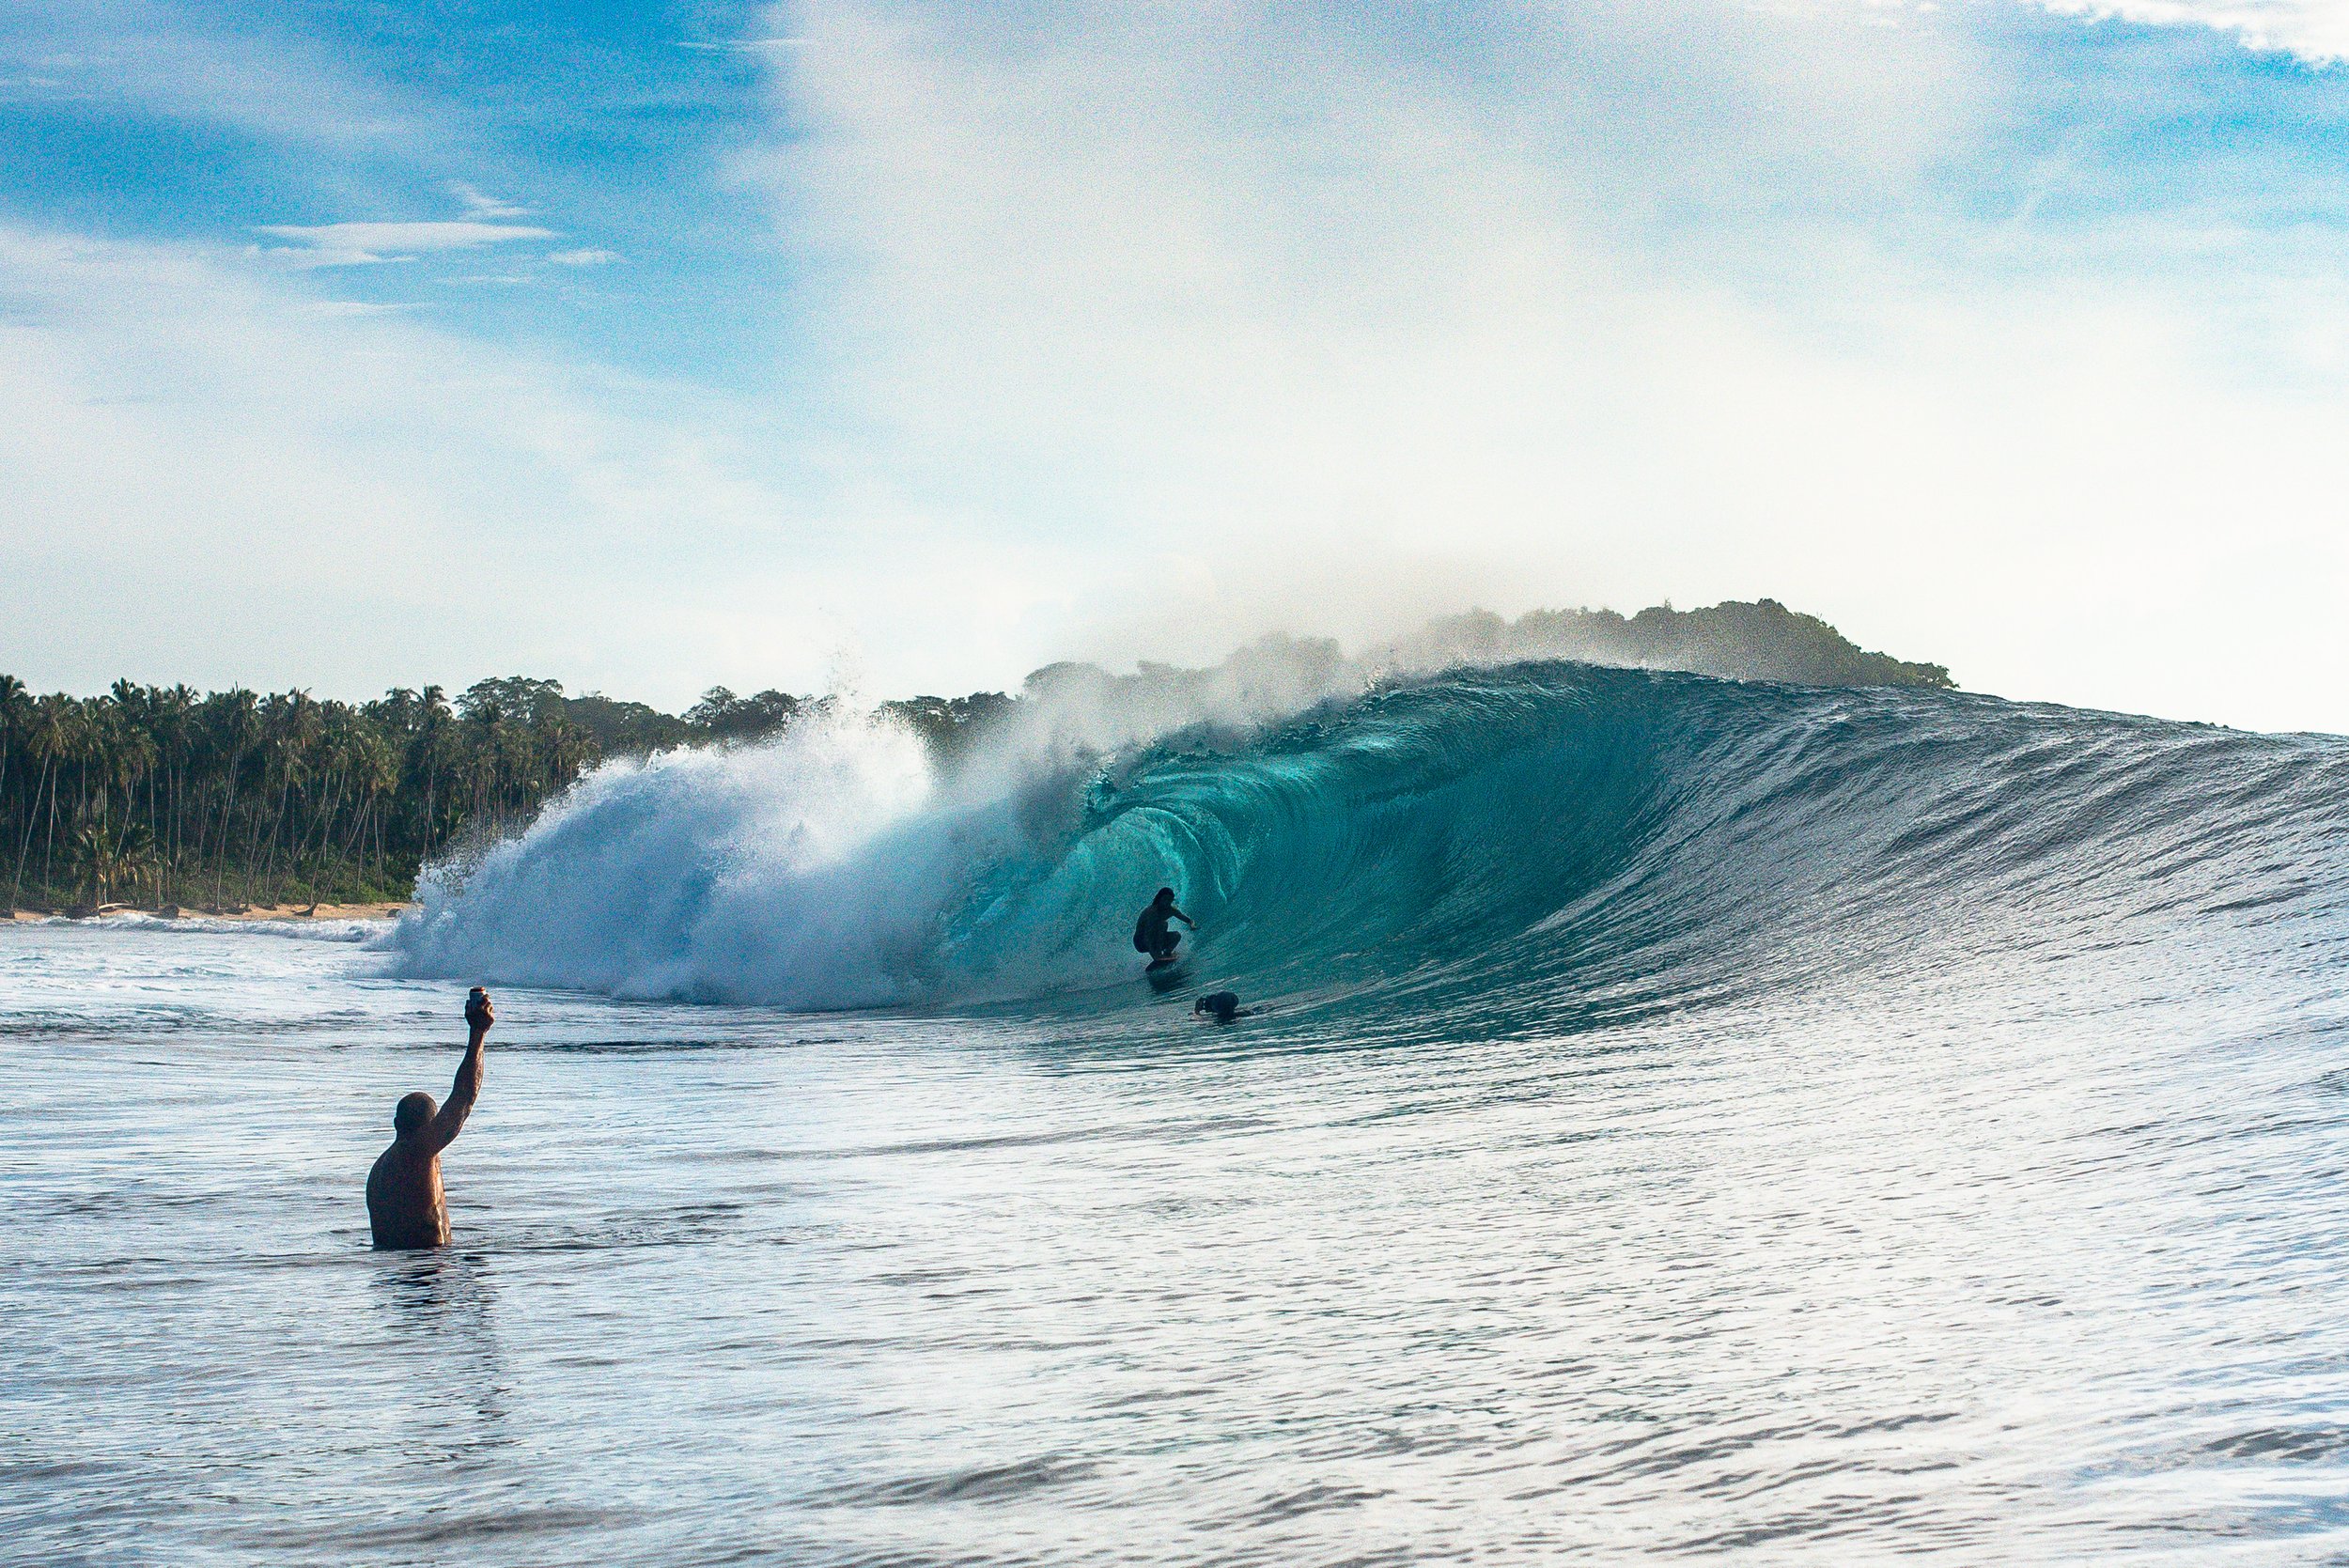 SWITCHFOOT MENTAWAI HAS A NEW WEBSITE, INSTAGRAM NAME &amp; EMAIL!